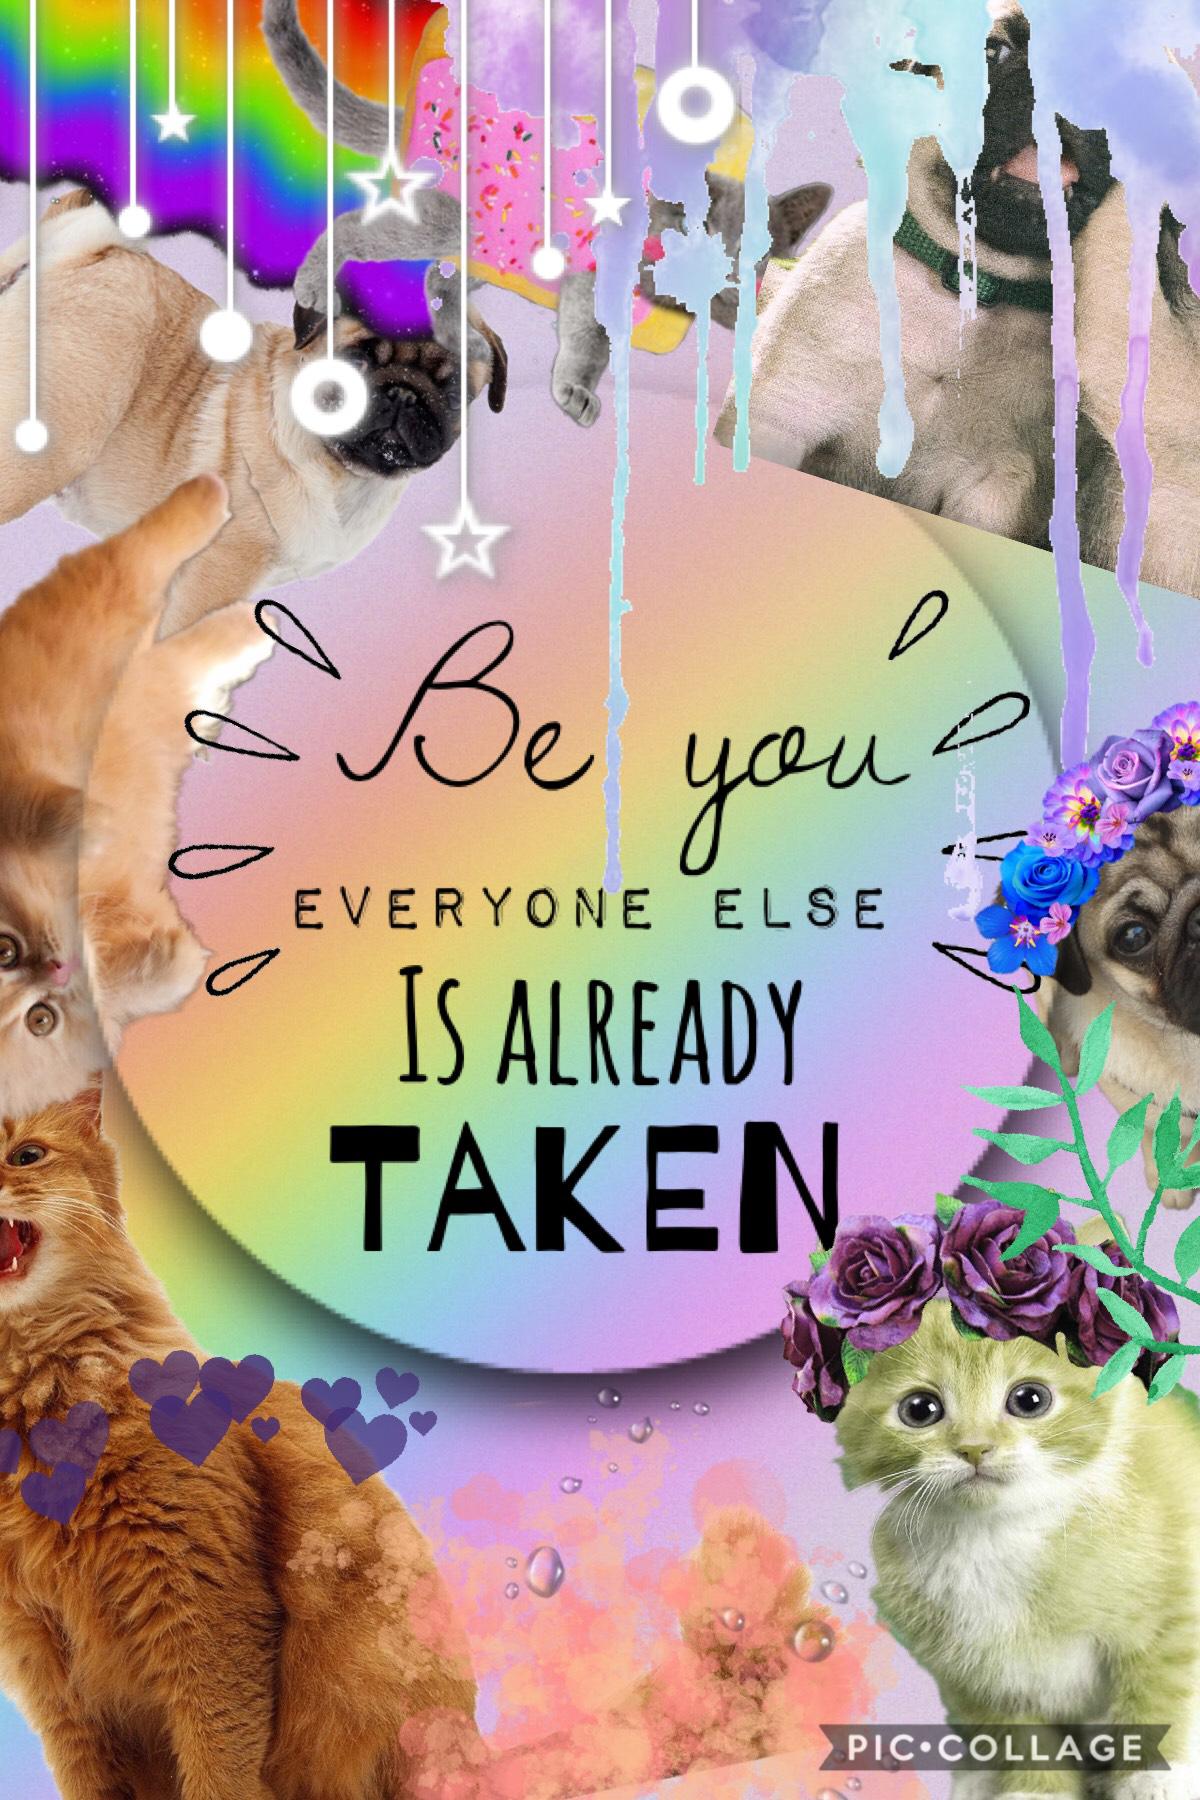 ^*-TAP-*^
Be you, honestly. I tried making all those weird collages with random pictures, but that’s not ME. This is me. Ye, a crazy collage of rainbows kittens and pugs.